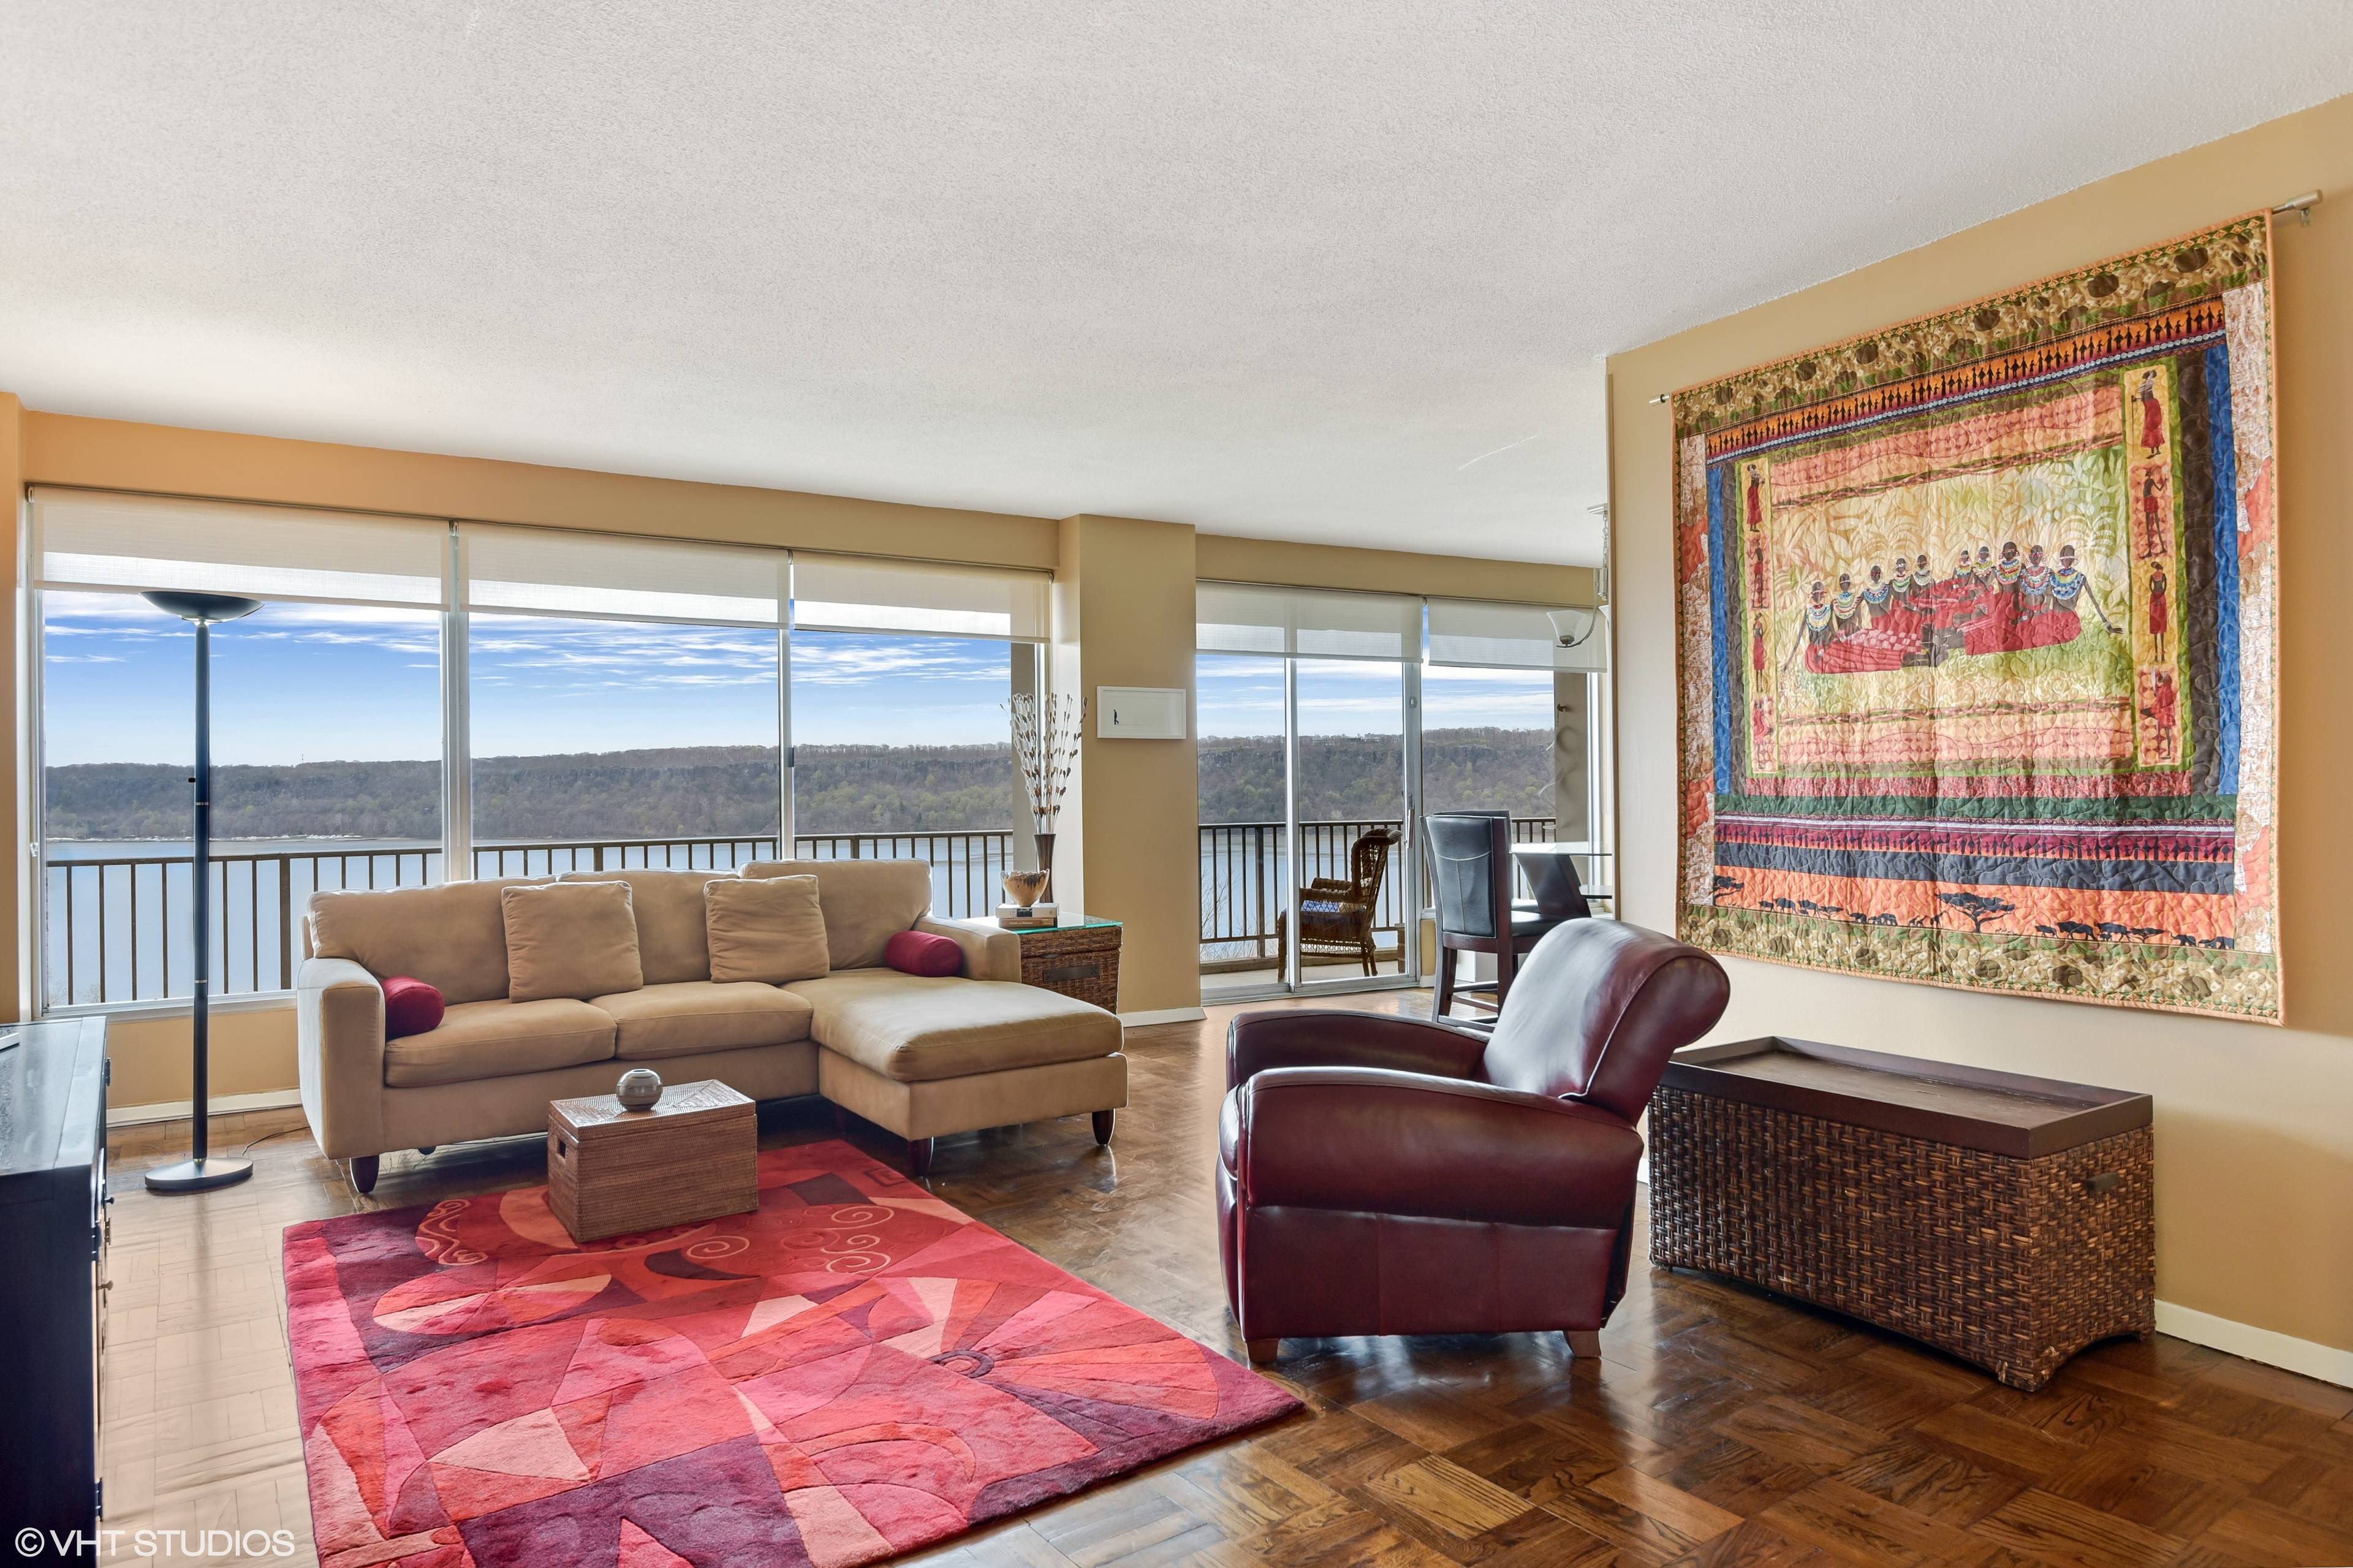 Sunny and spacious 2 bed 2 bath apartment offers a resort lifestyle just minutes from the Upper West Side.